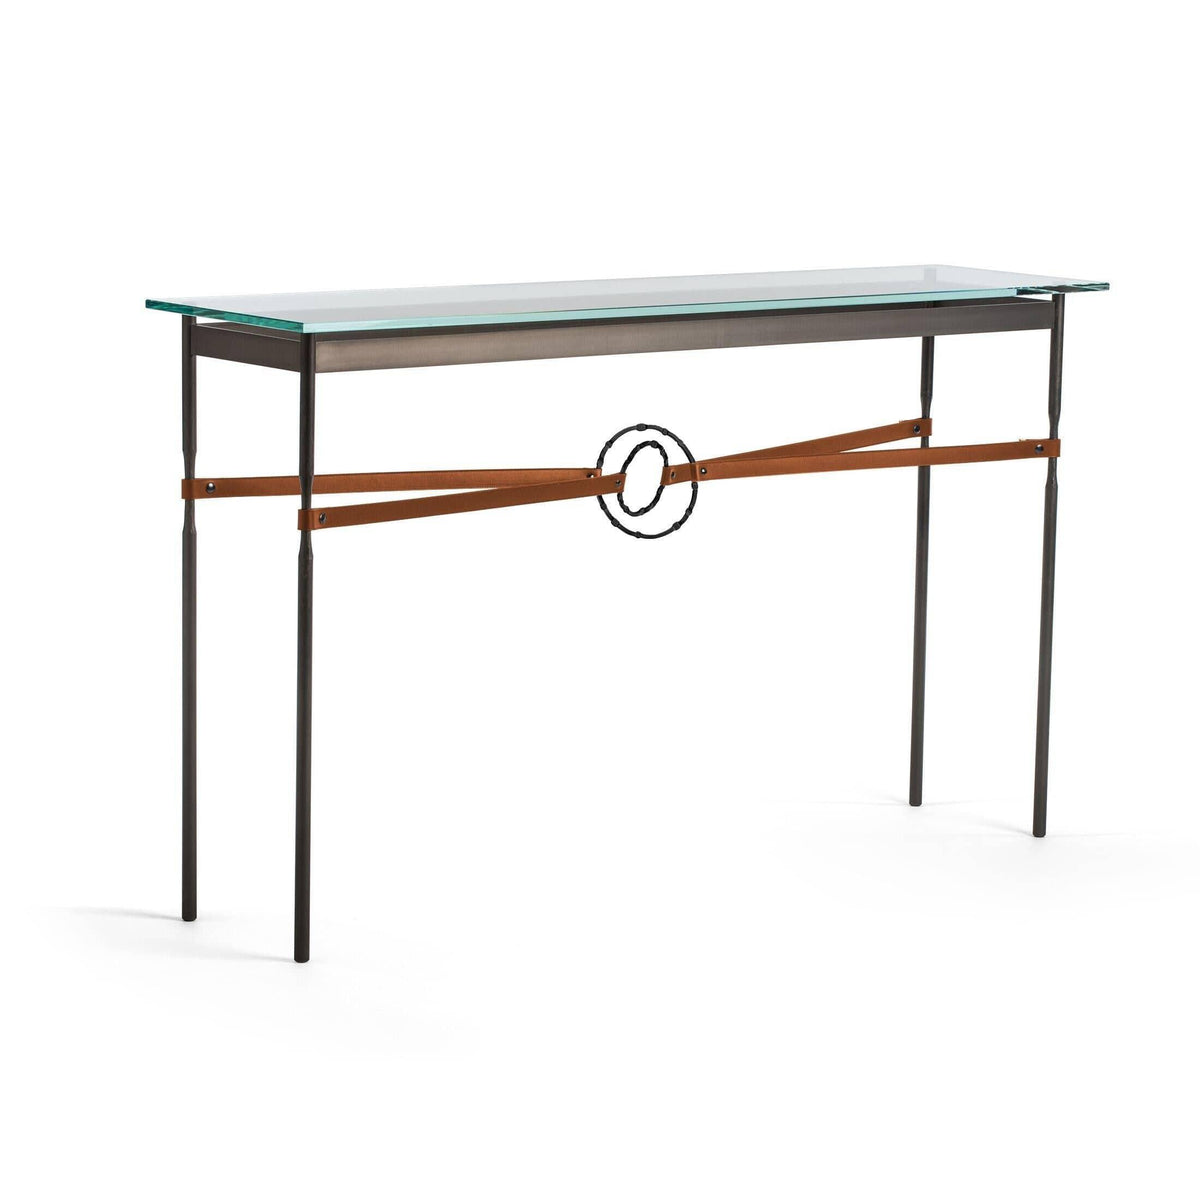 Hubbardton Forge - Equus Chestnut Leather Console Table - 750118-07-10-LC-VA0714 | Montreal Lighting & Hardware